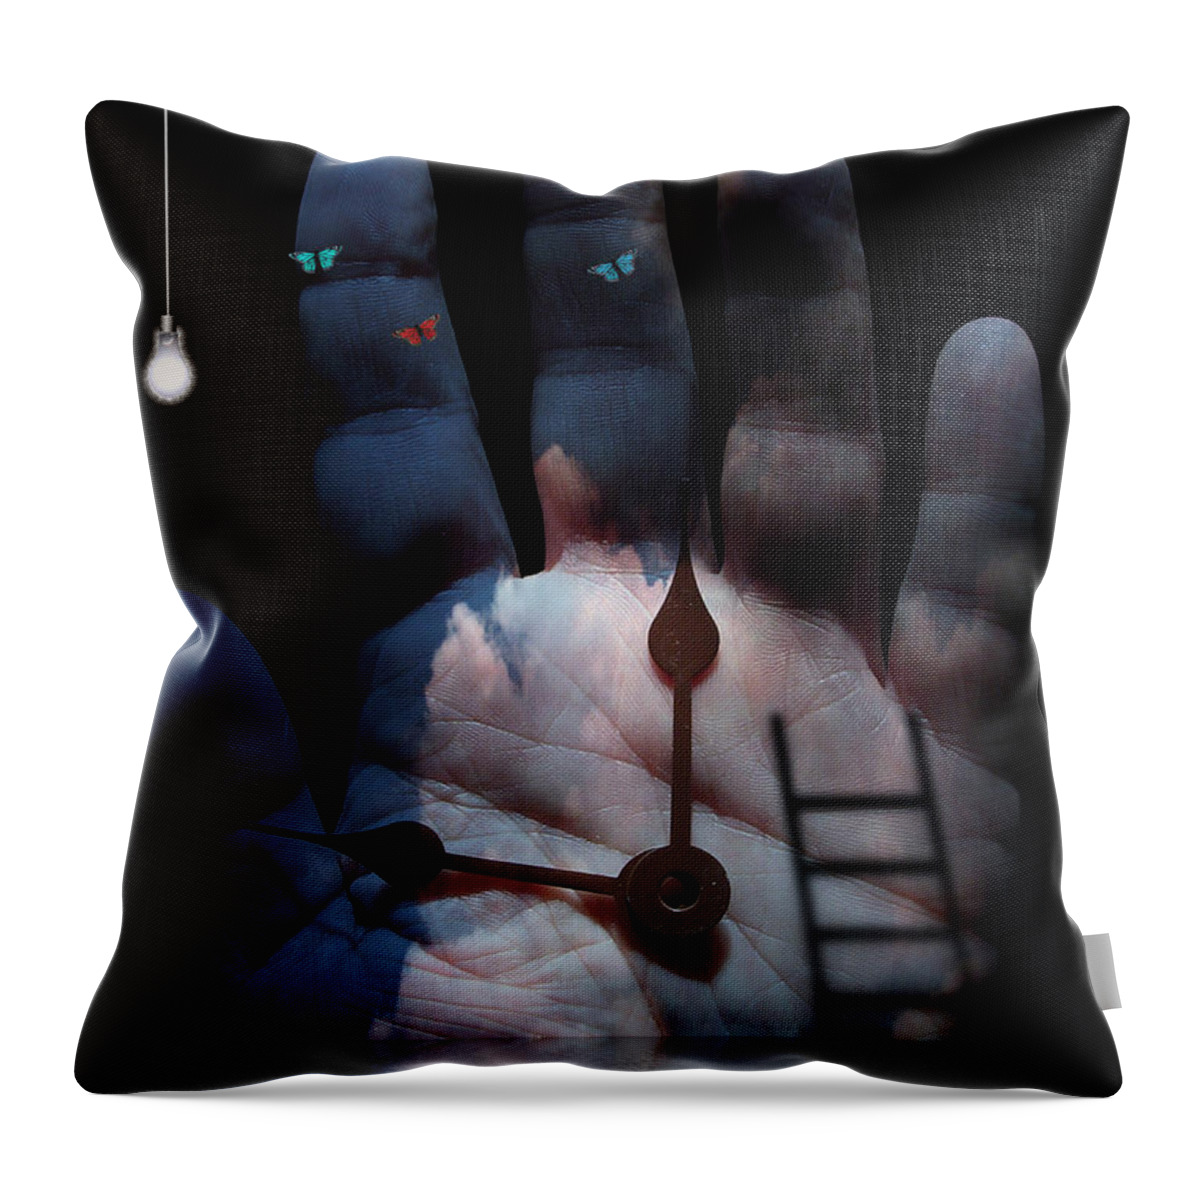 Art Throw Pillow featuring the digital art Touch by Bruce Rolff